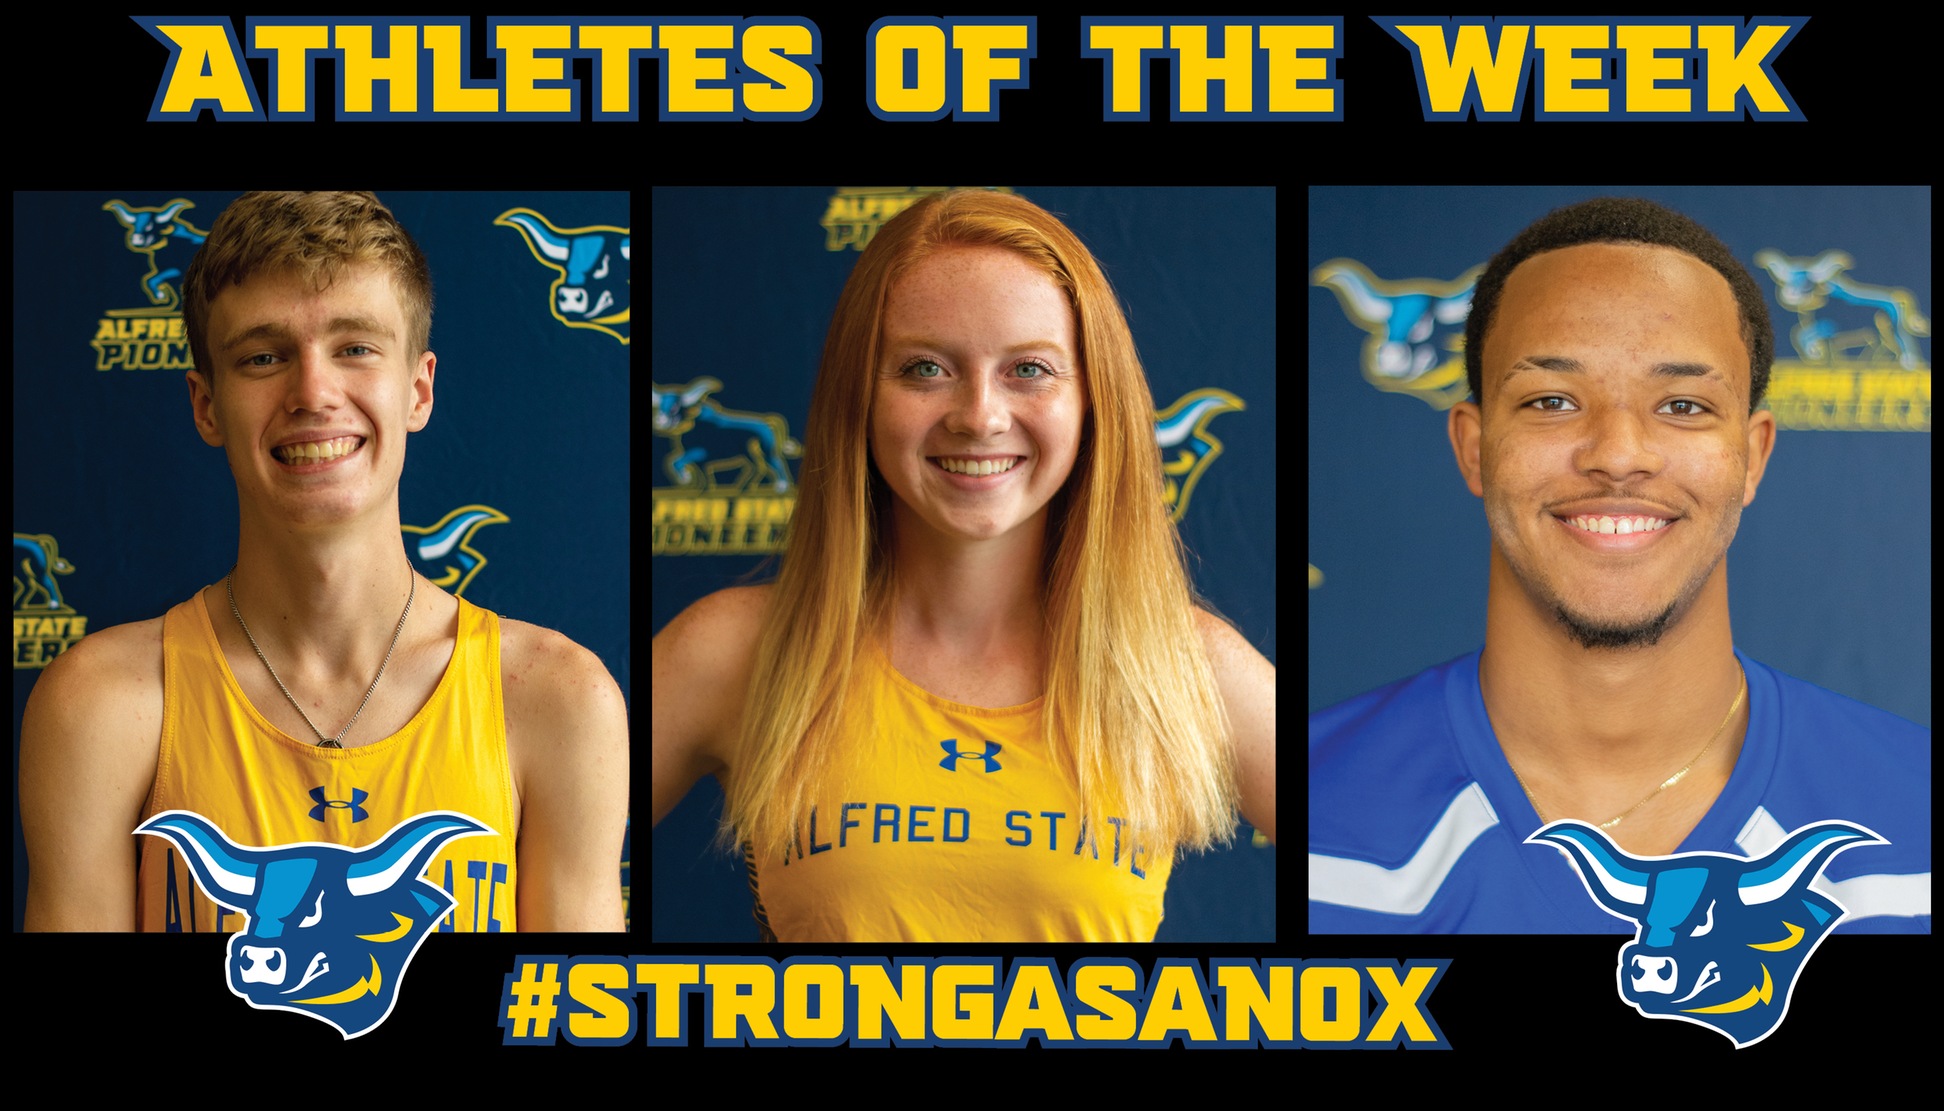 Athletes of the Week for November 4th - Gavin Bathgate, Caitlyn Caltagirone, and Dashown Wilson